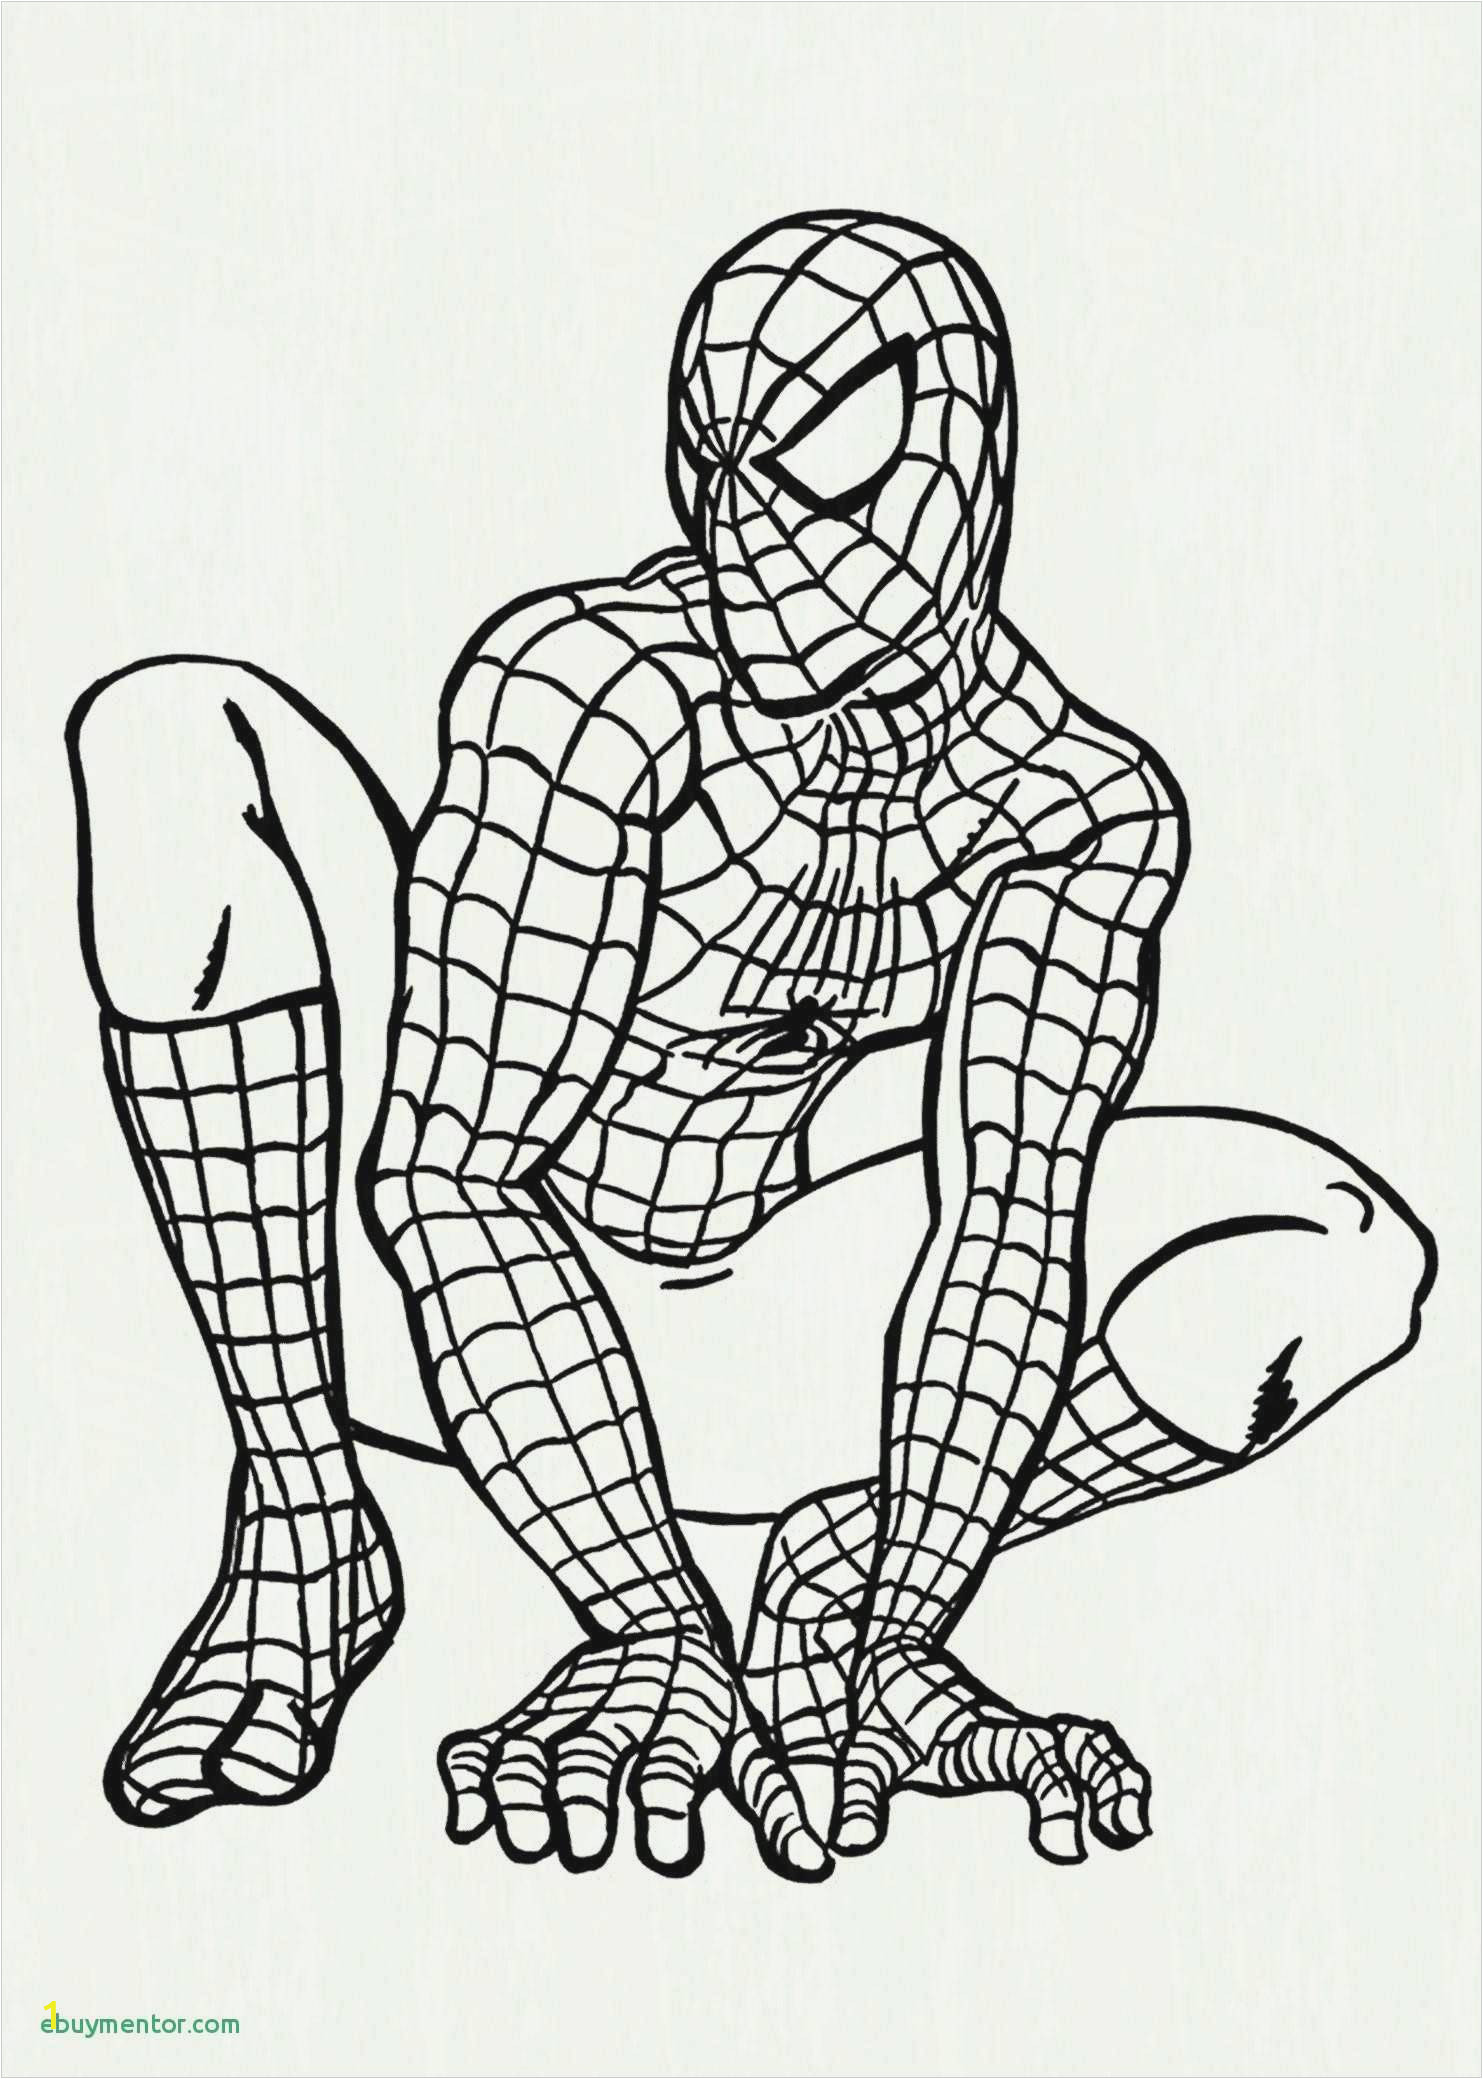 Computer Coloring Pages for Kids New Coloring Pages Superhero Printable Fresh 0 0d